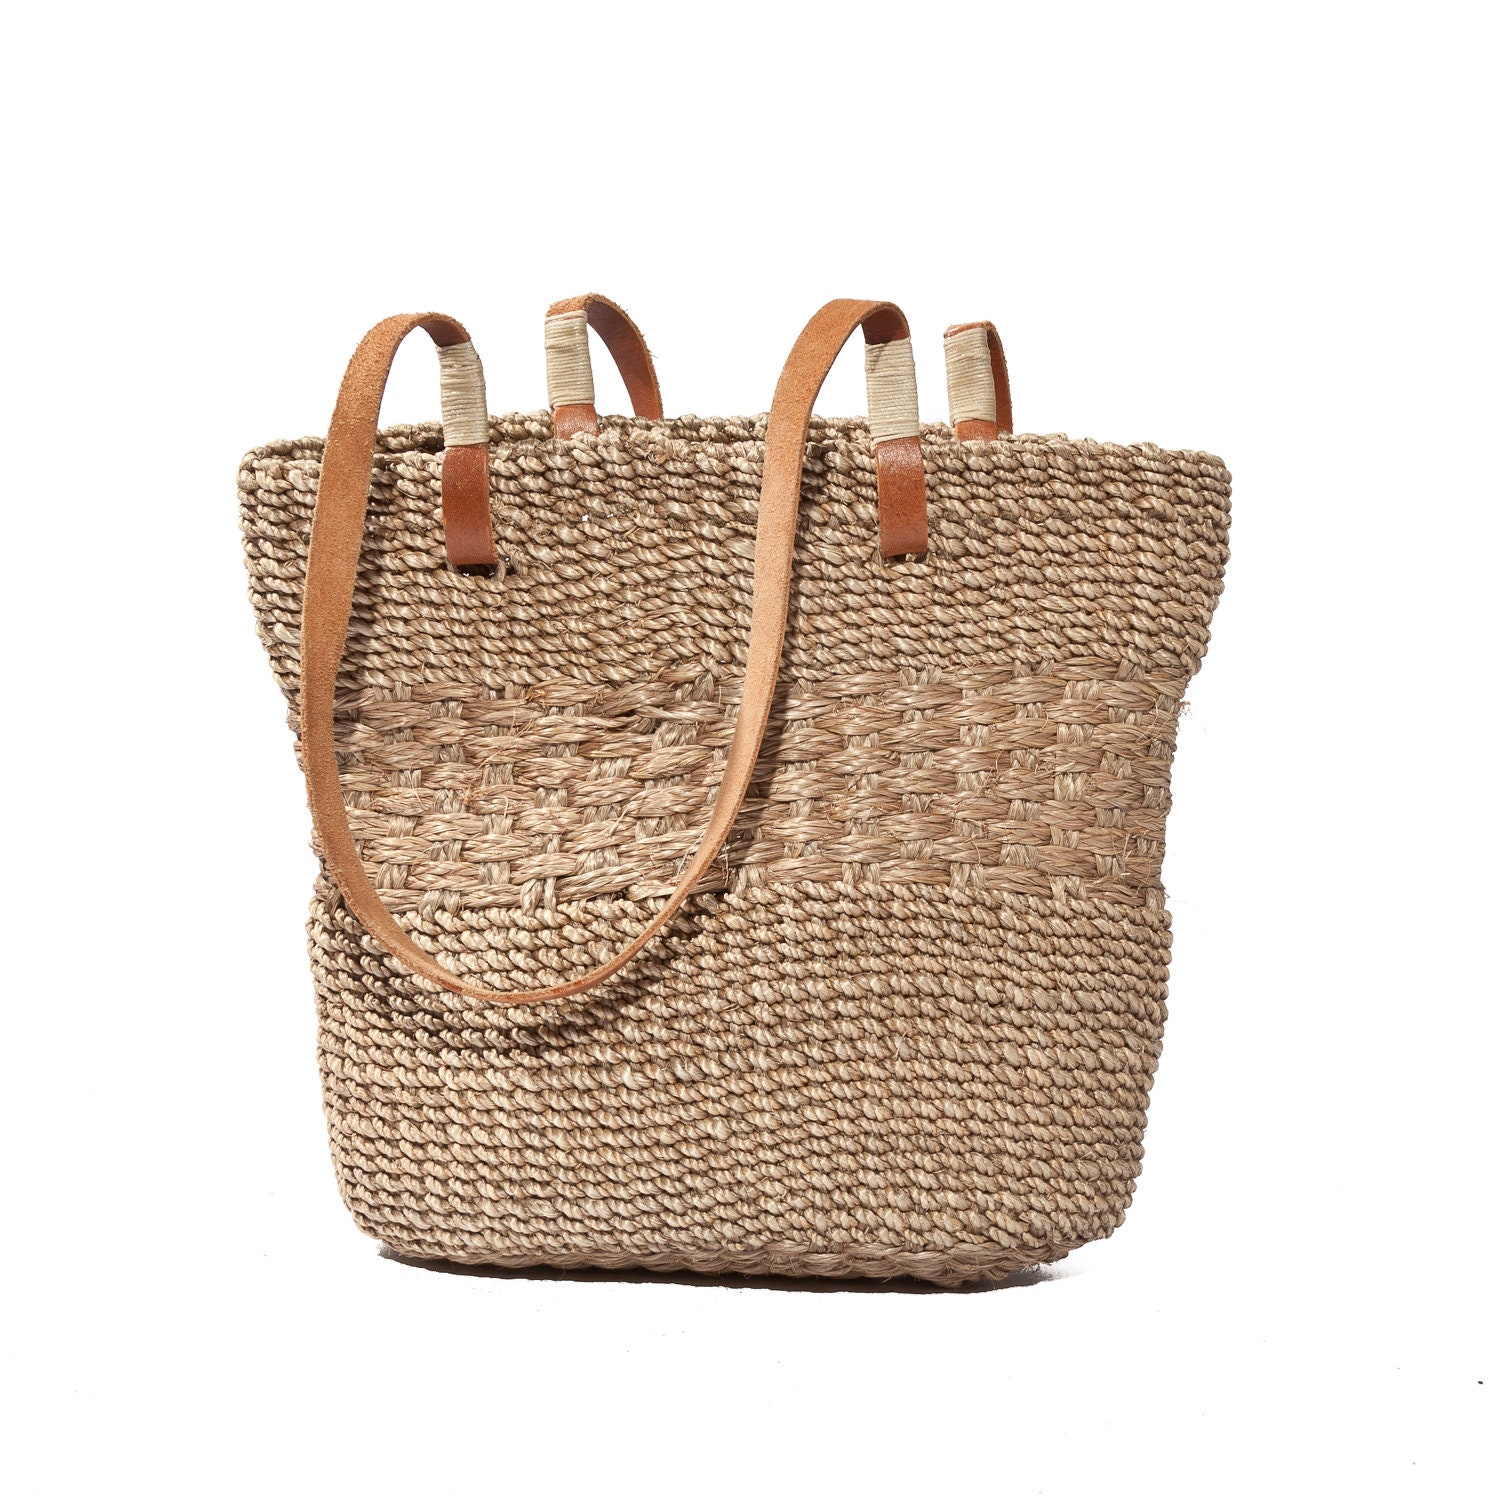 Small Sisal Woven Bag Beige Straw Tote Brown Leather Shoulder